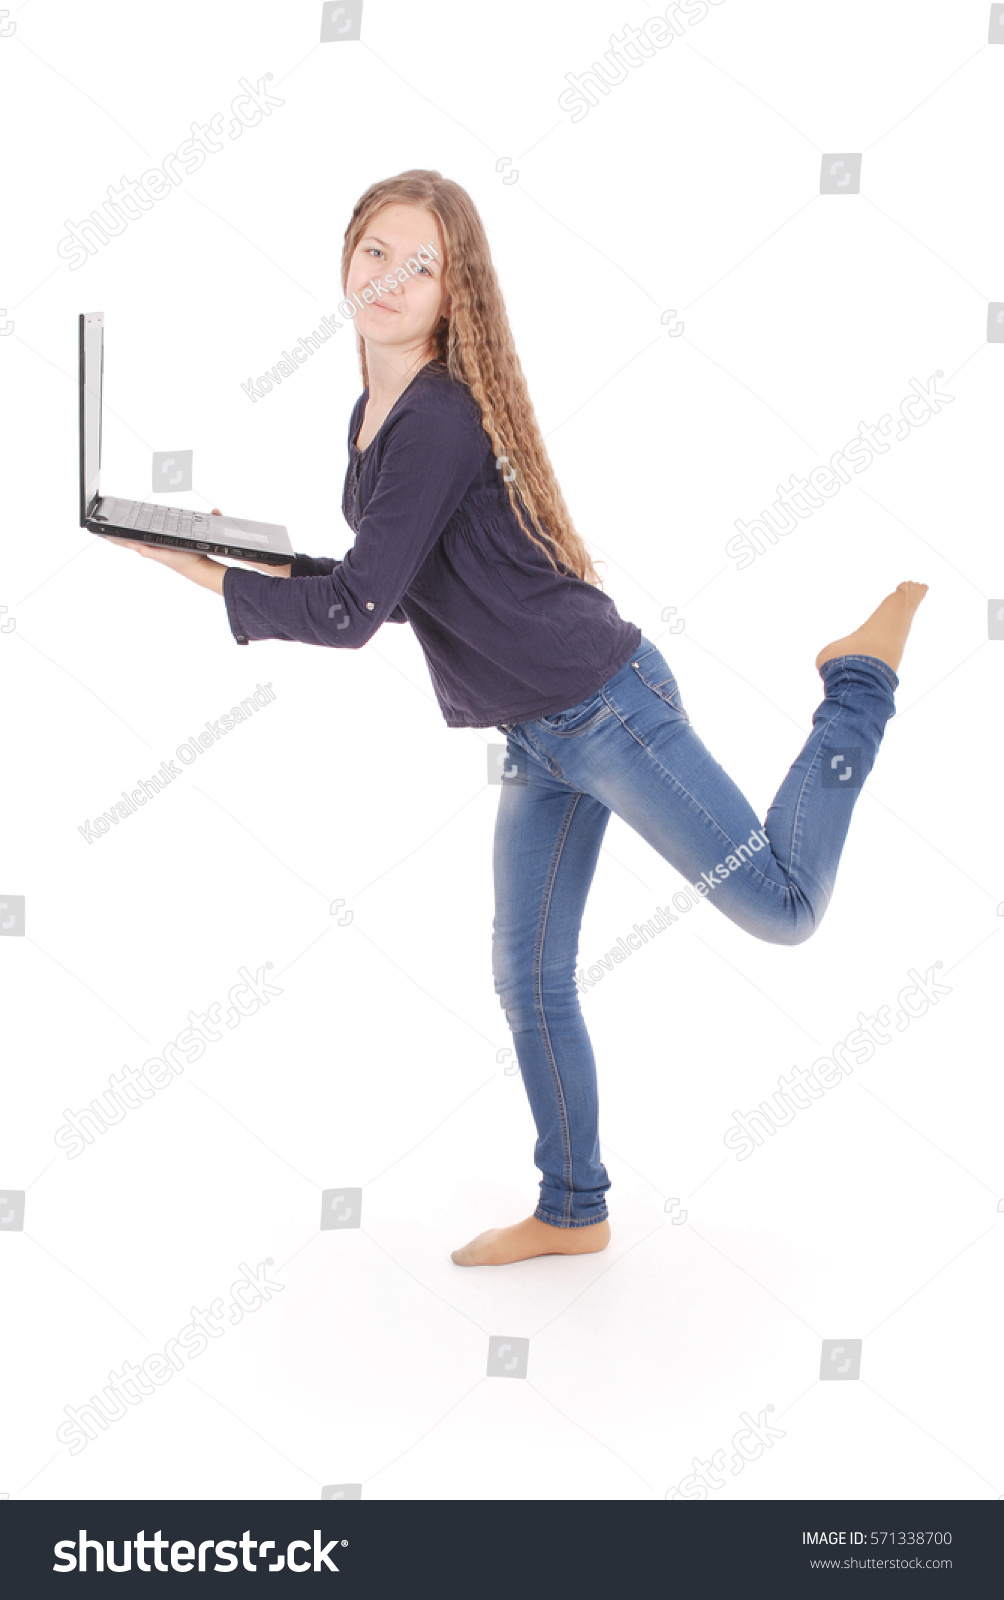 Smiling student teenage girl with laptop isolated on white #571338700